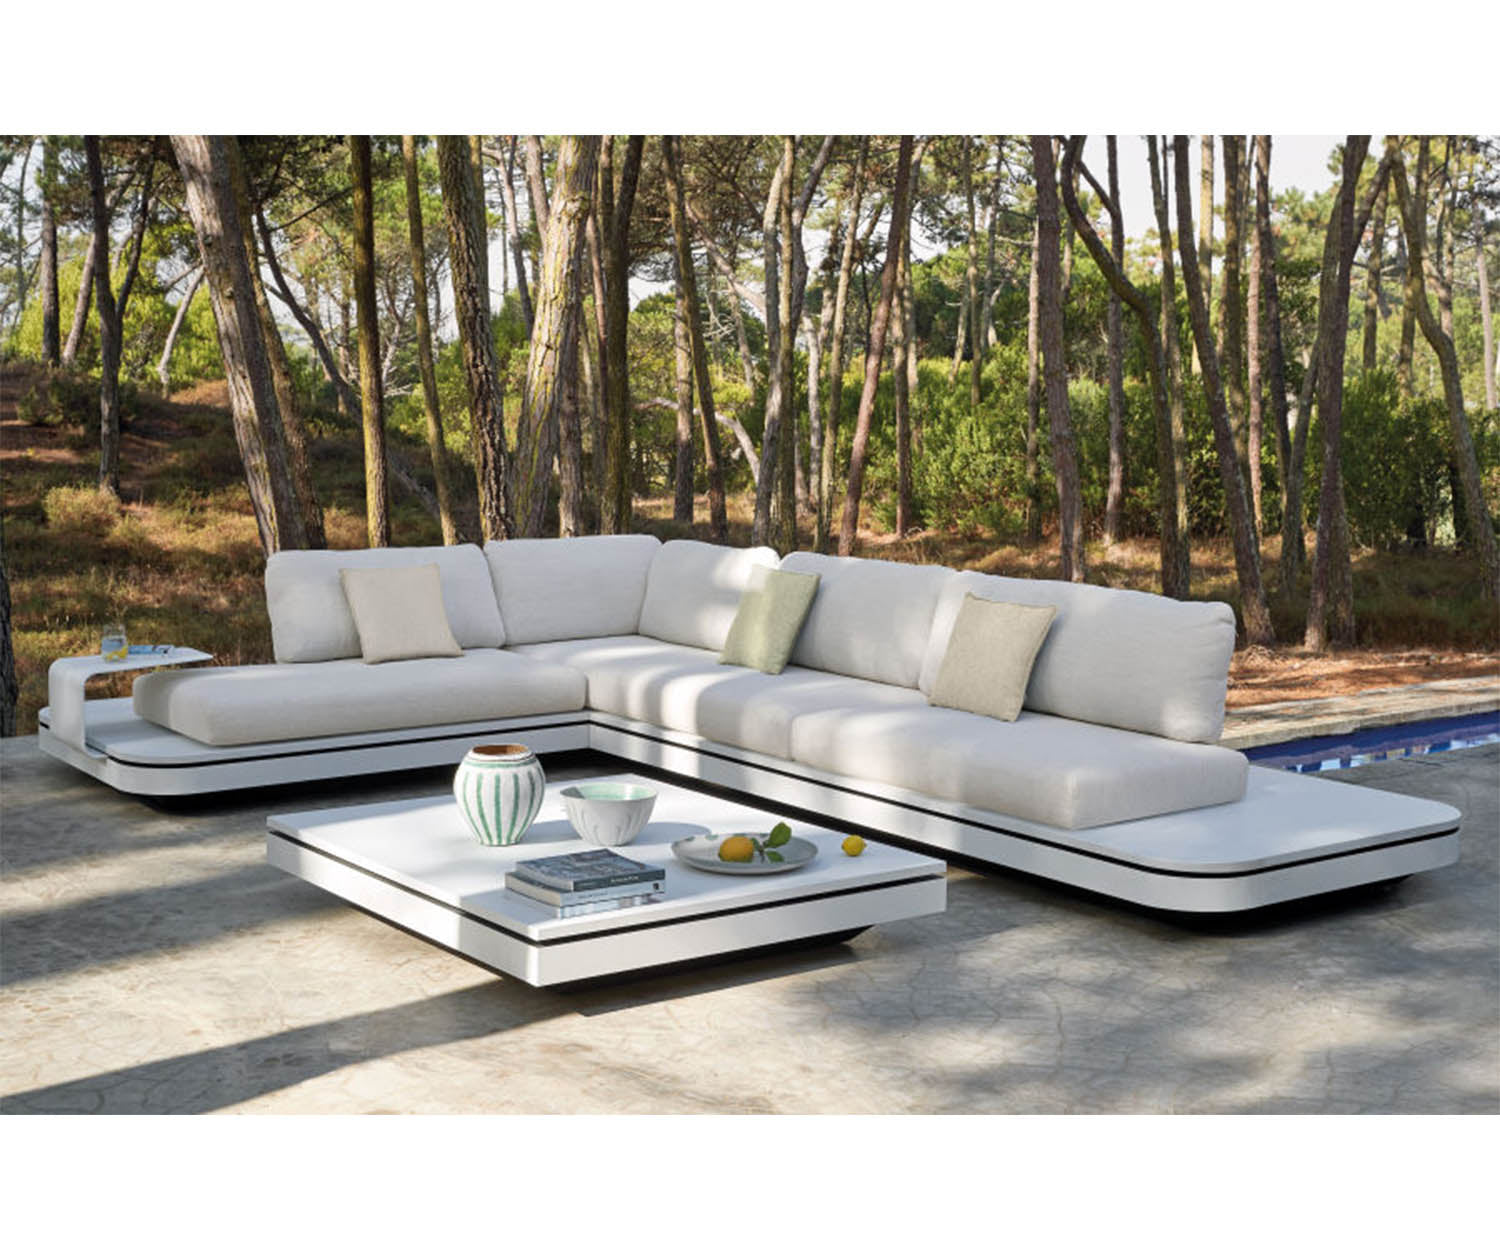 Elements Concept 1 Sectional Manutti